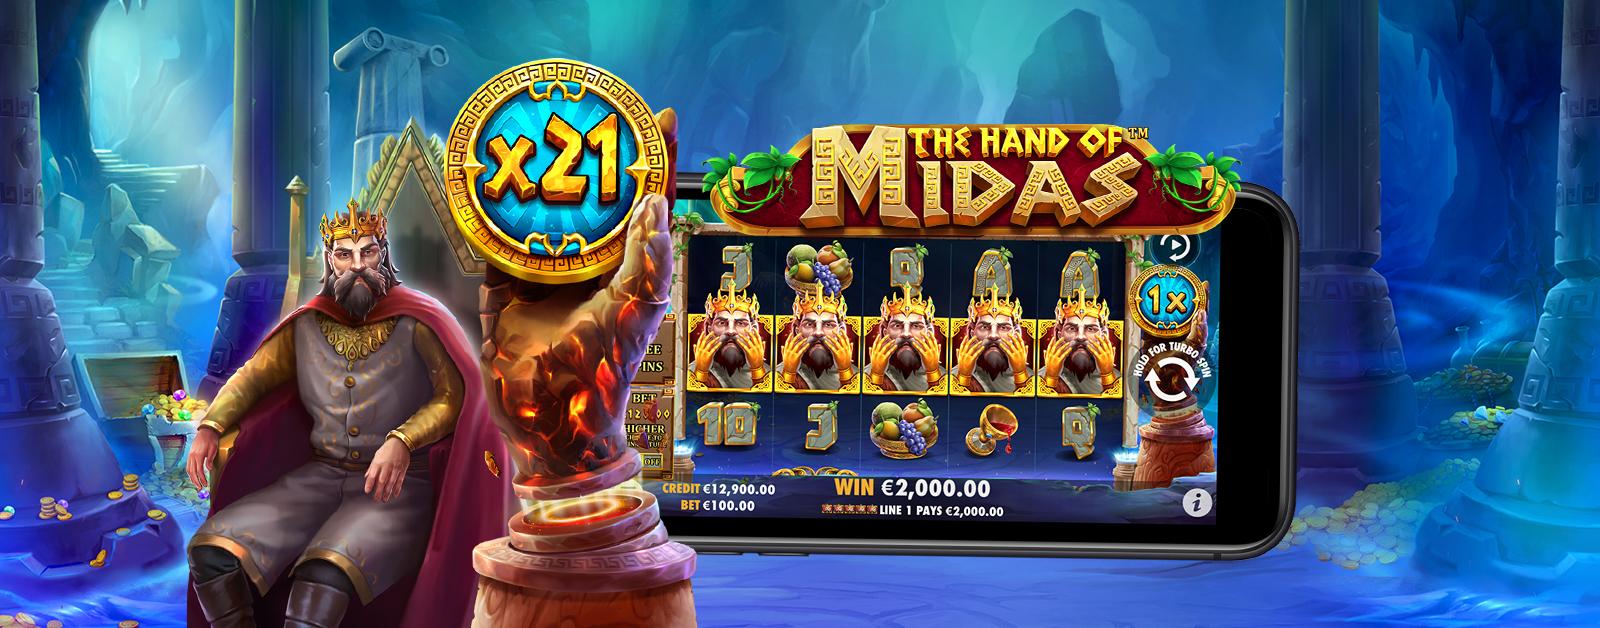 Midas Golden Touch - Play now with Crypto